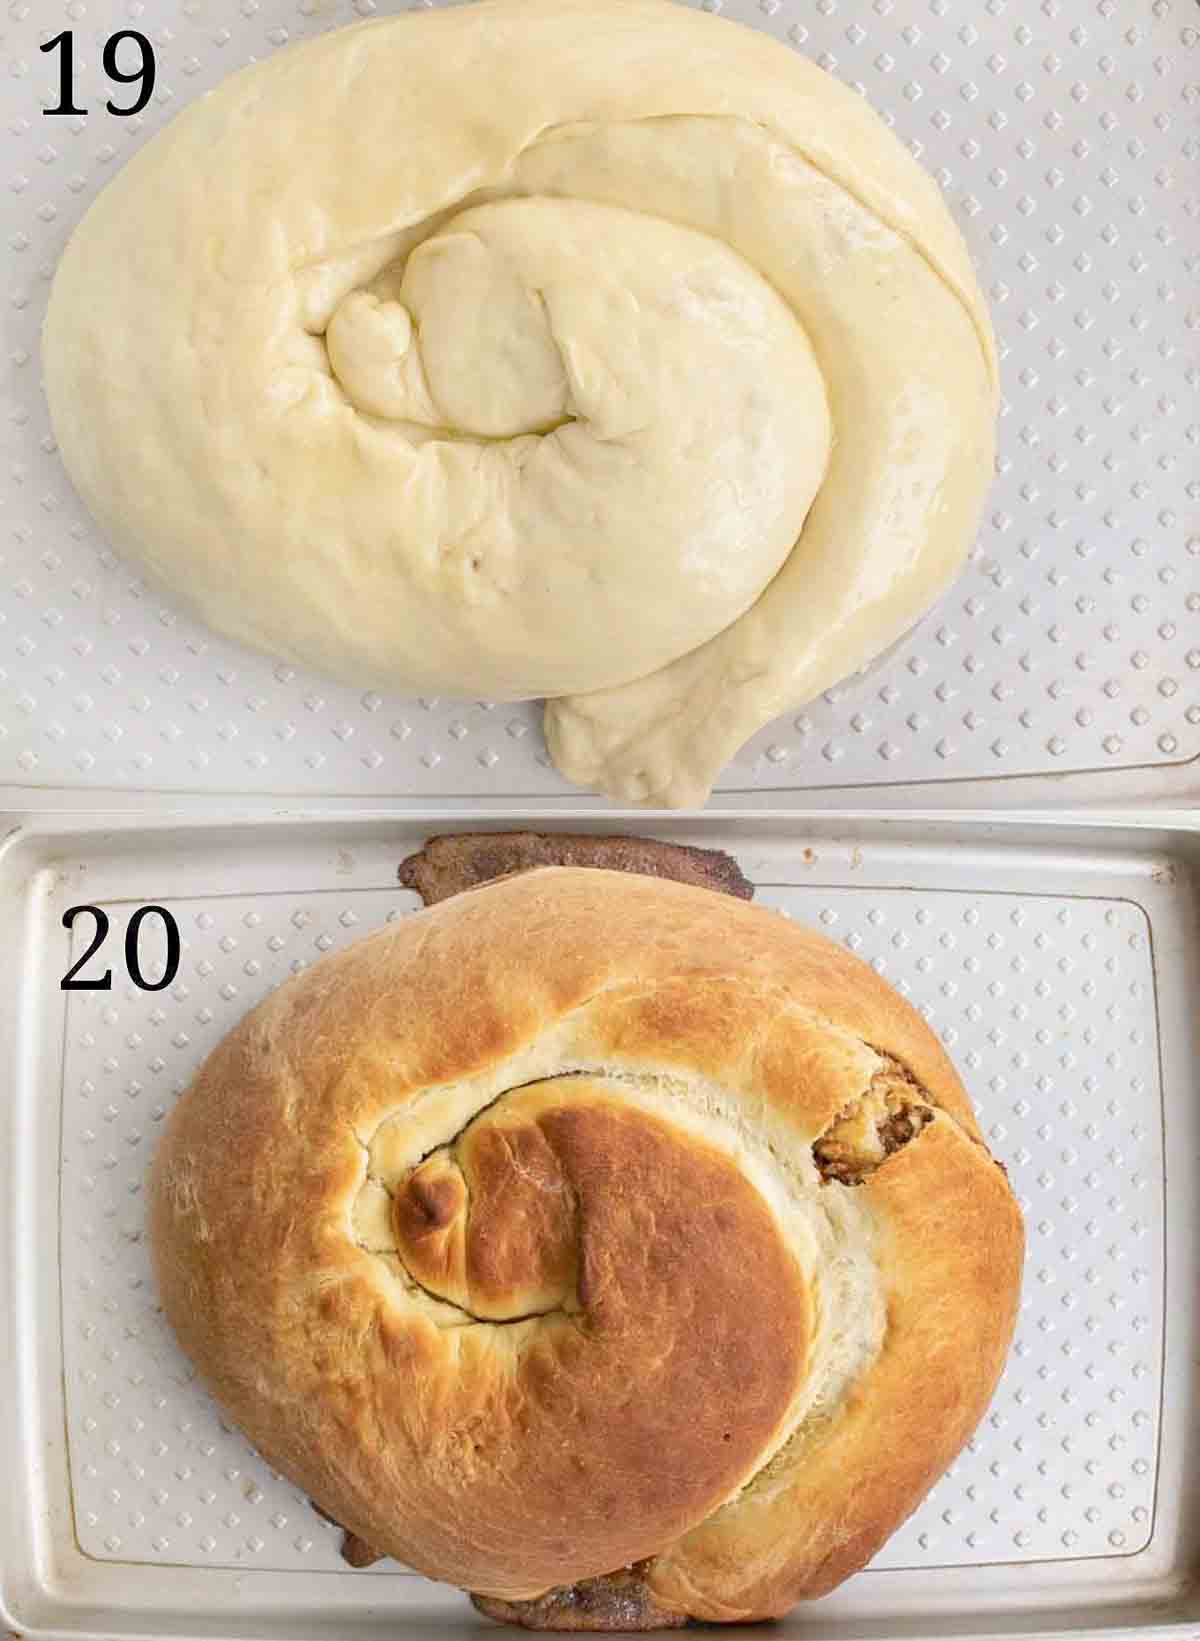 two images showing the unbaked and baked potica